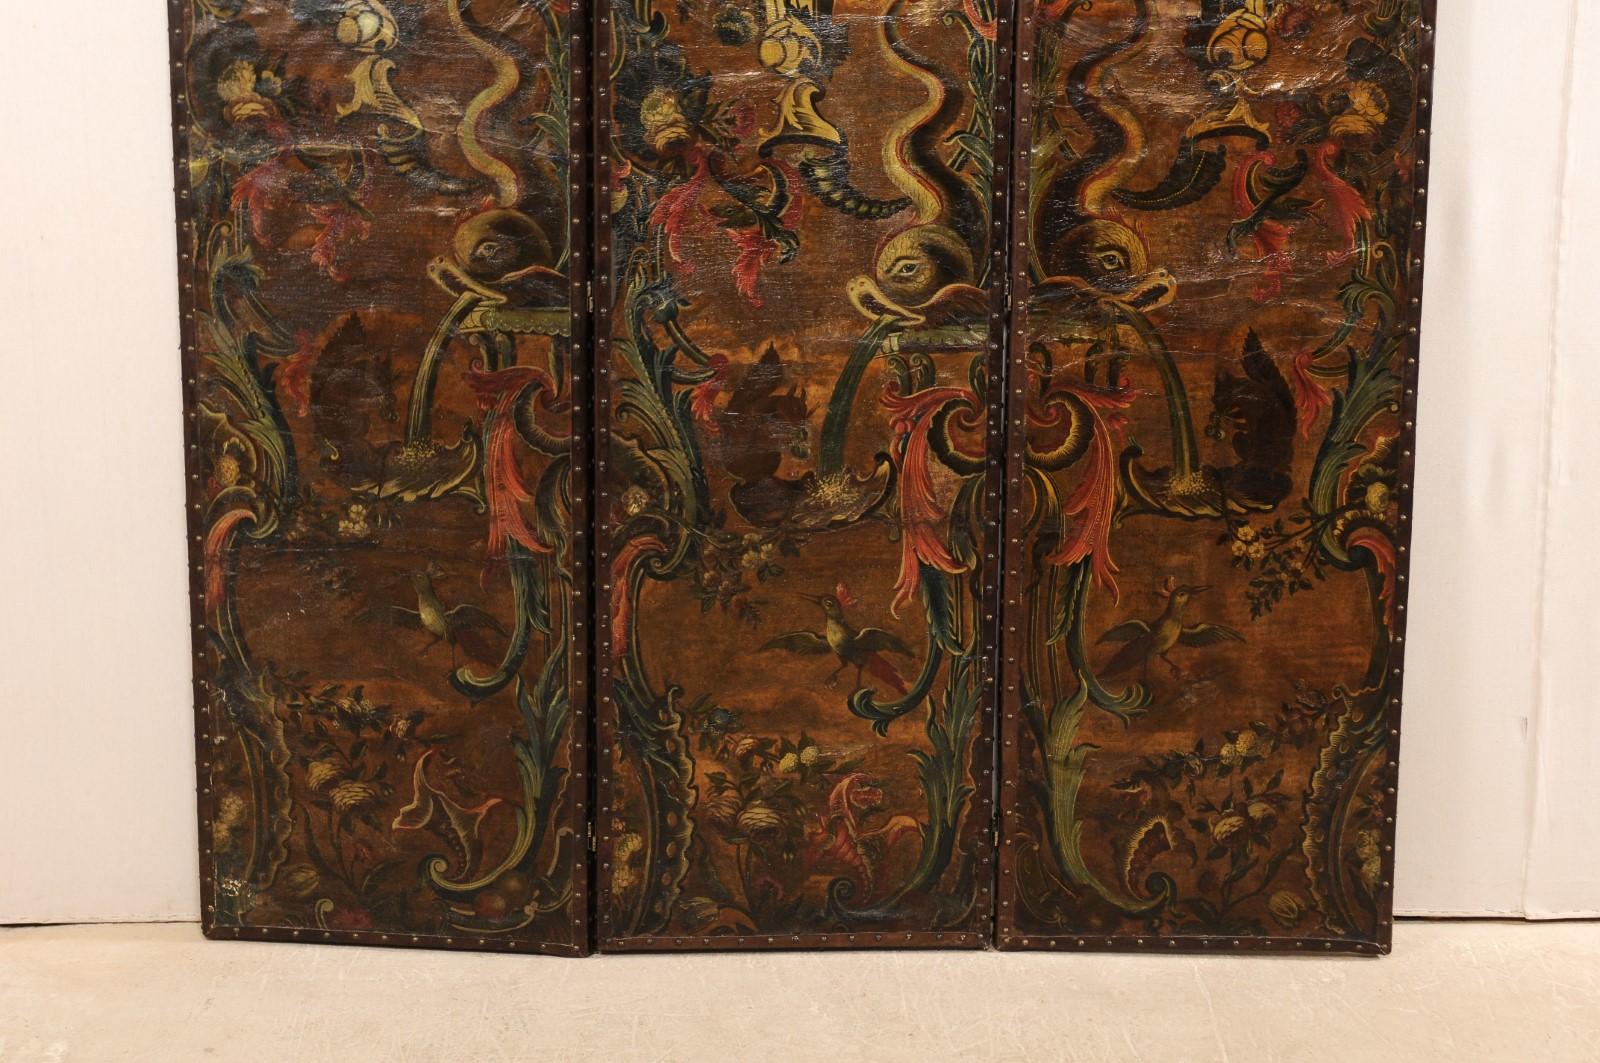 Italian Pair of Leather Embossed Room Dividers, Turn of the 17th & 18th Century For Sale 11